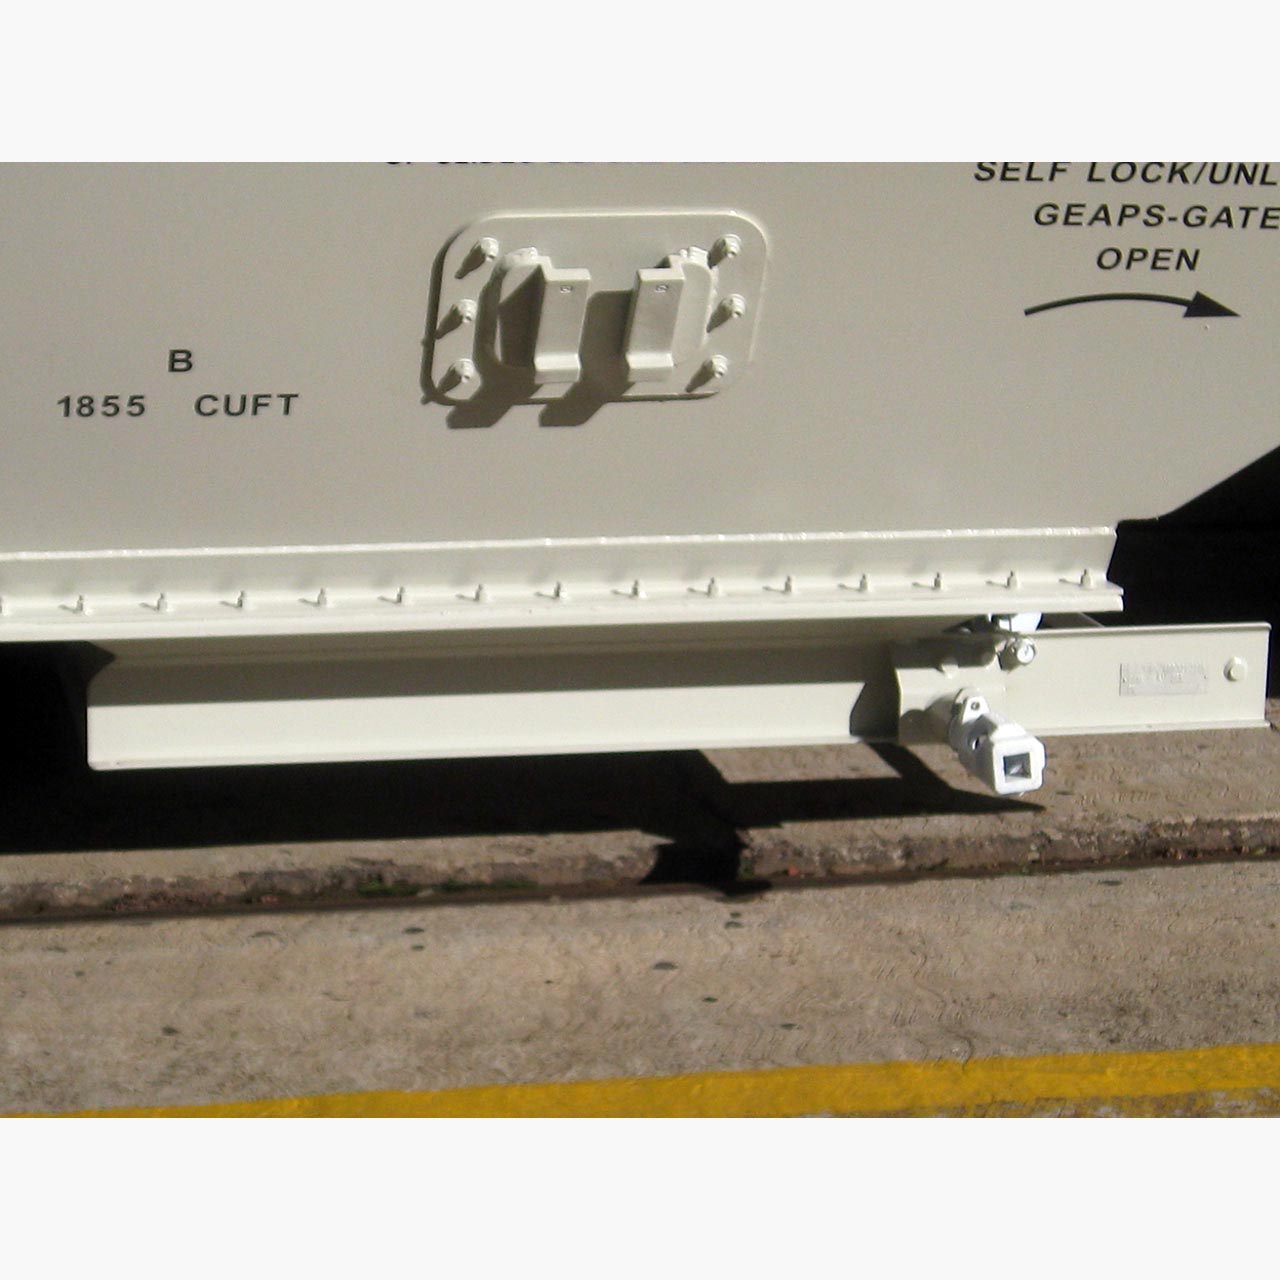 Outlet Gate Systems│Wabtec Corporation